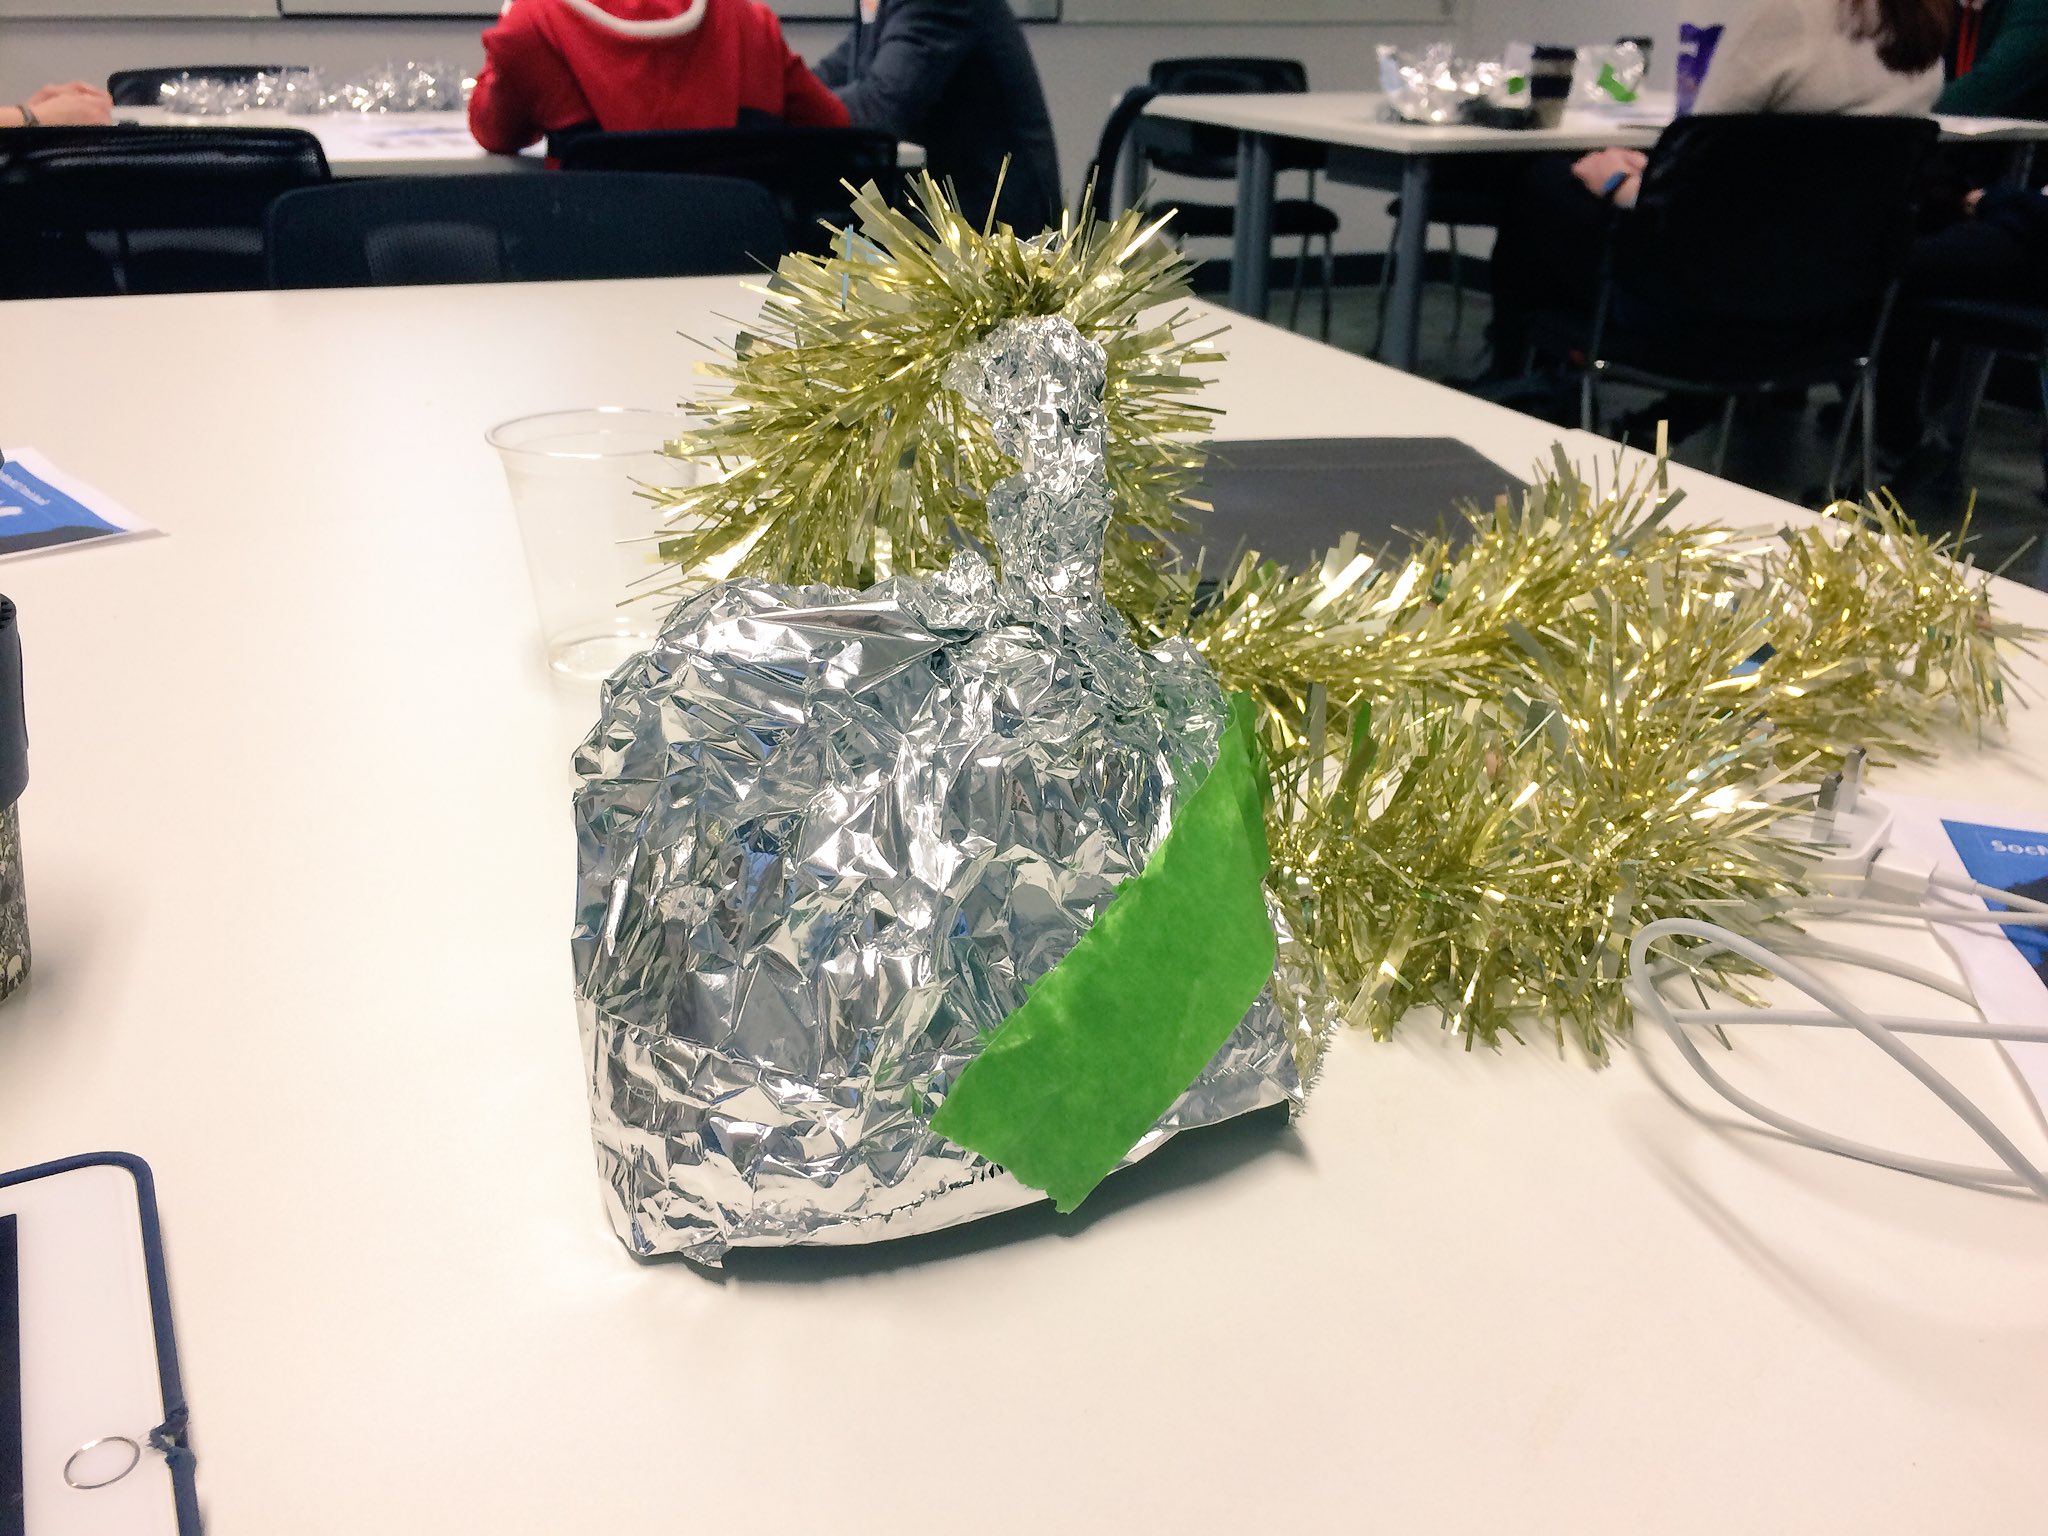 Made myself an awesome tin foil Xmas hat to keep the #fakenews out #SocMedHE17 https://t.co/csJARWPbqg